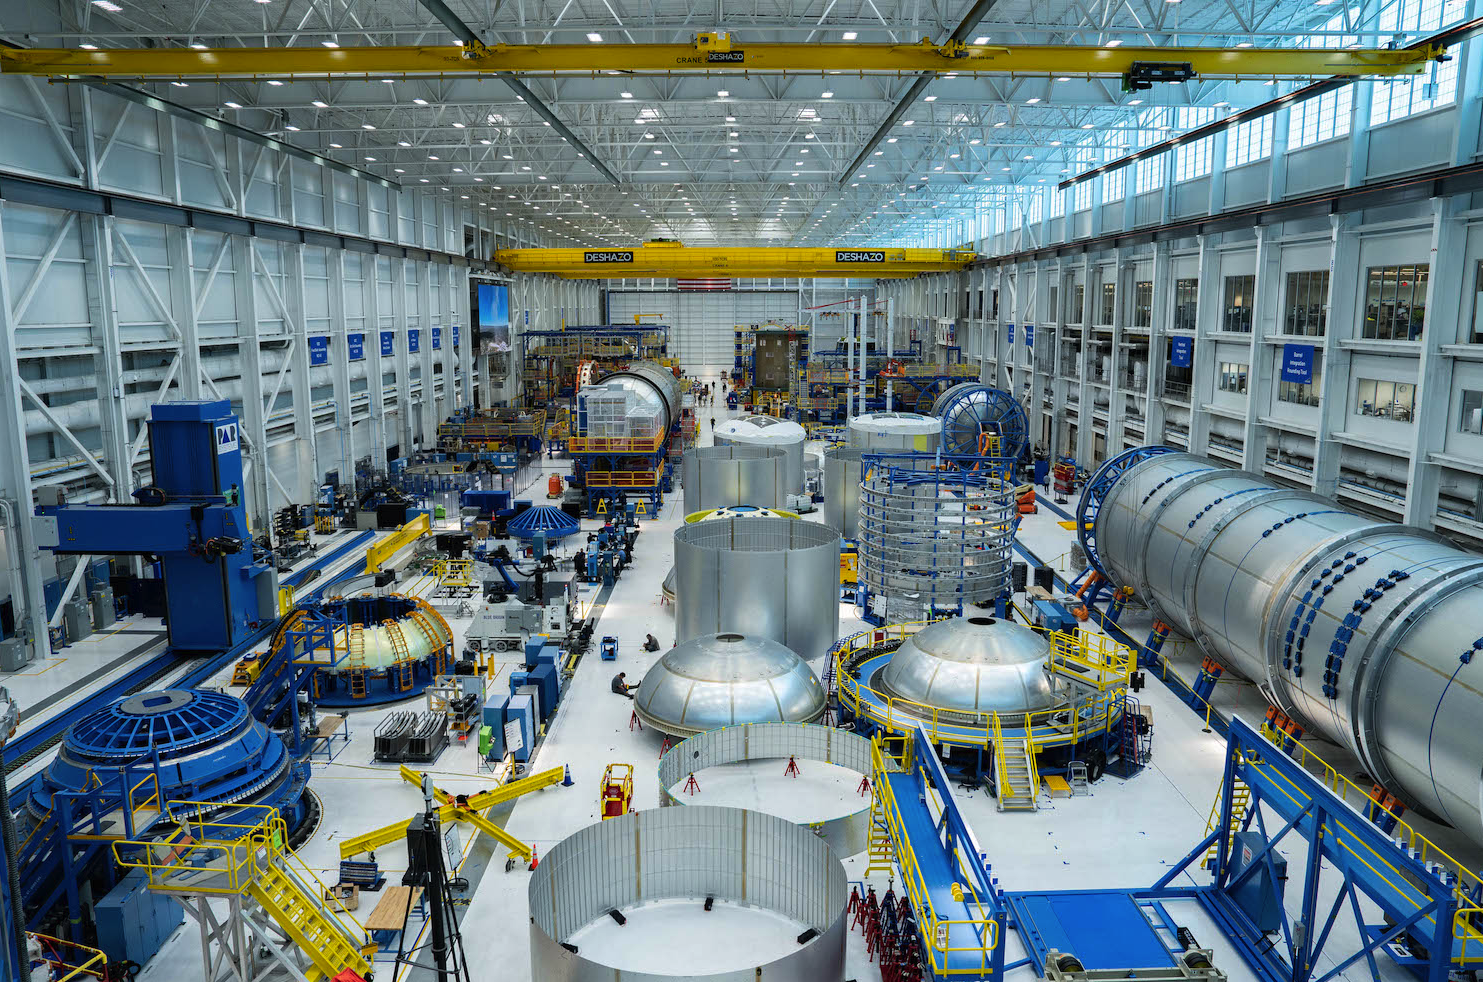 New Glenn’s first and second stages in process at Blue Origin’s orbital launch vehicle factory at Cape Canaveral, FL. (June 12, 2023)